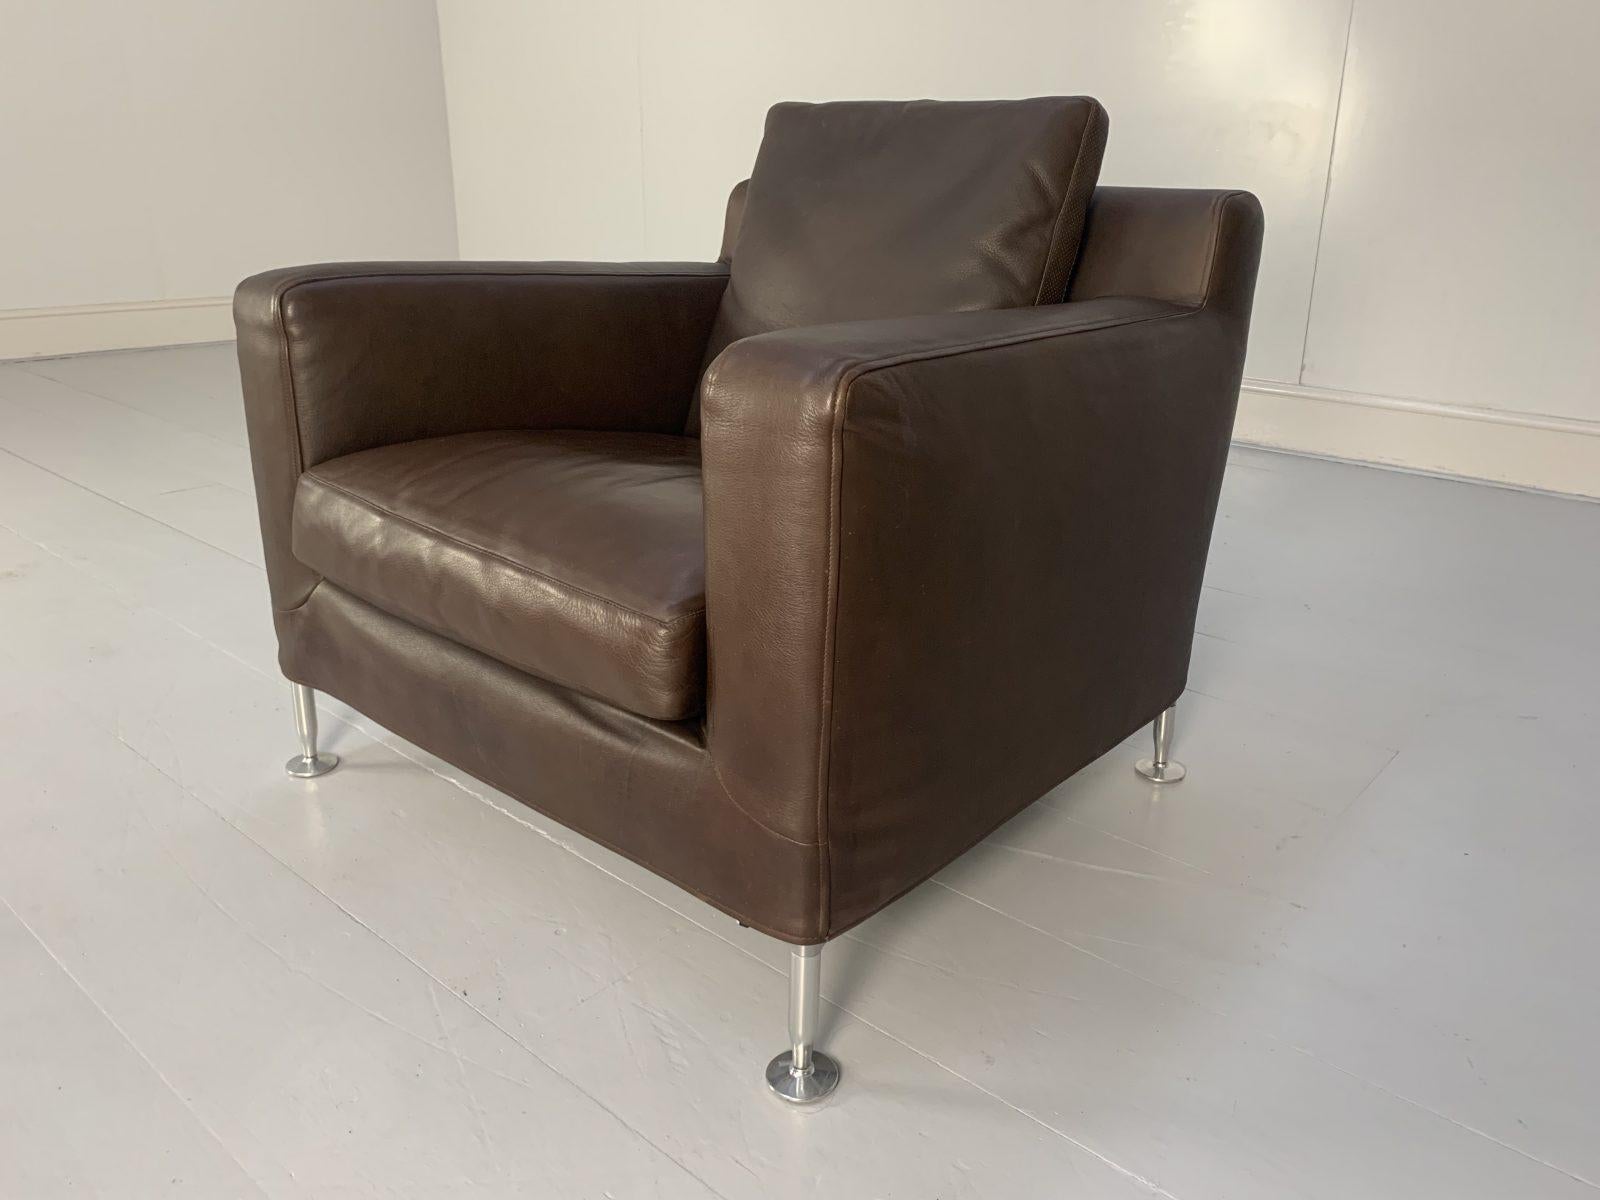 Pair of B&B Italia “Harry H85” Armchairs in Brown “Gamma” Leather For Sale 6